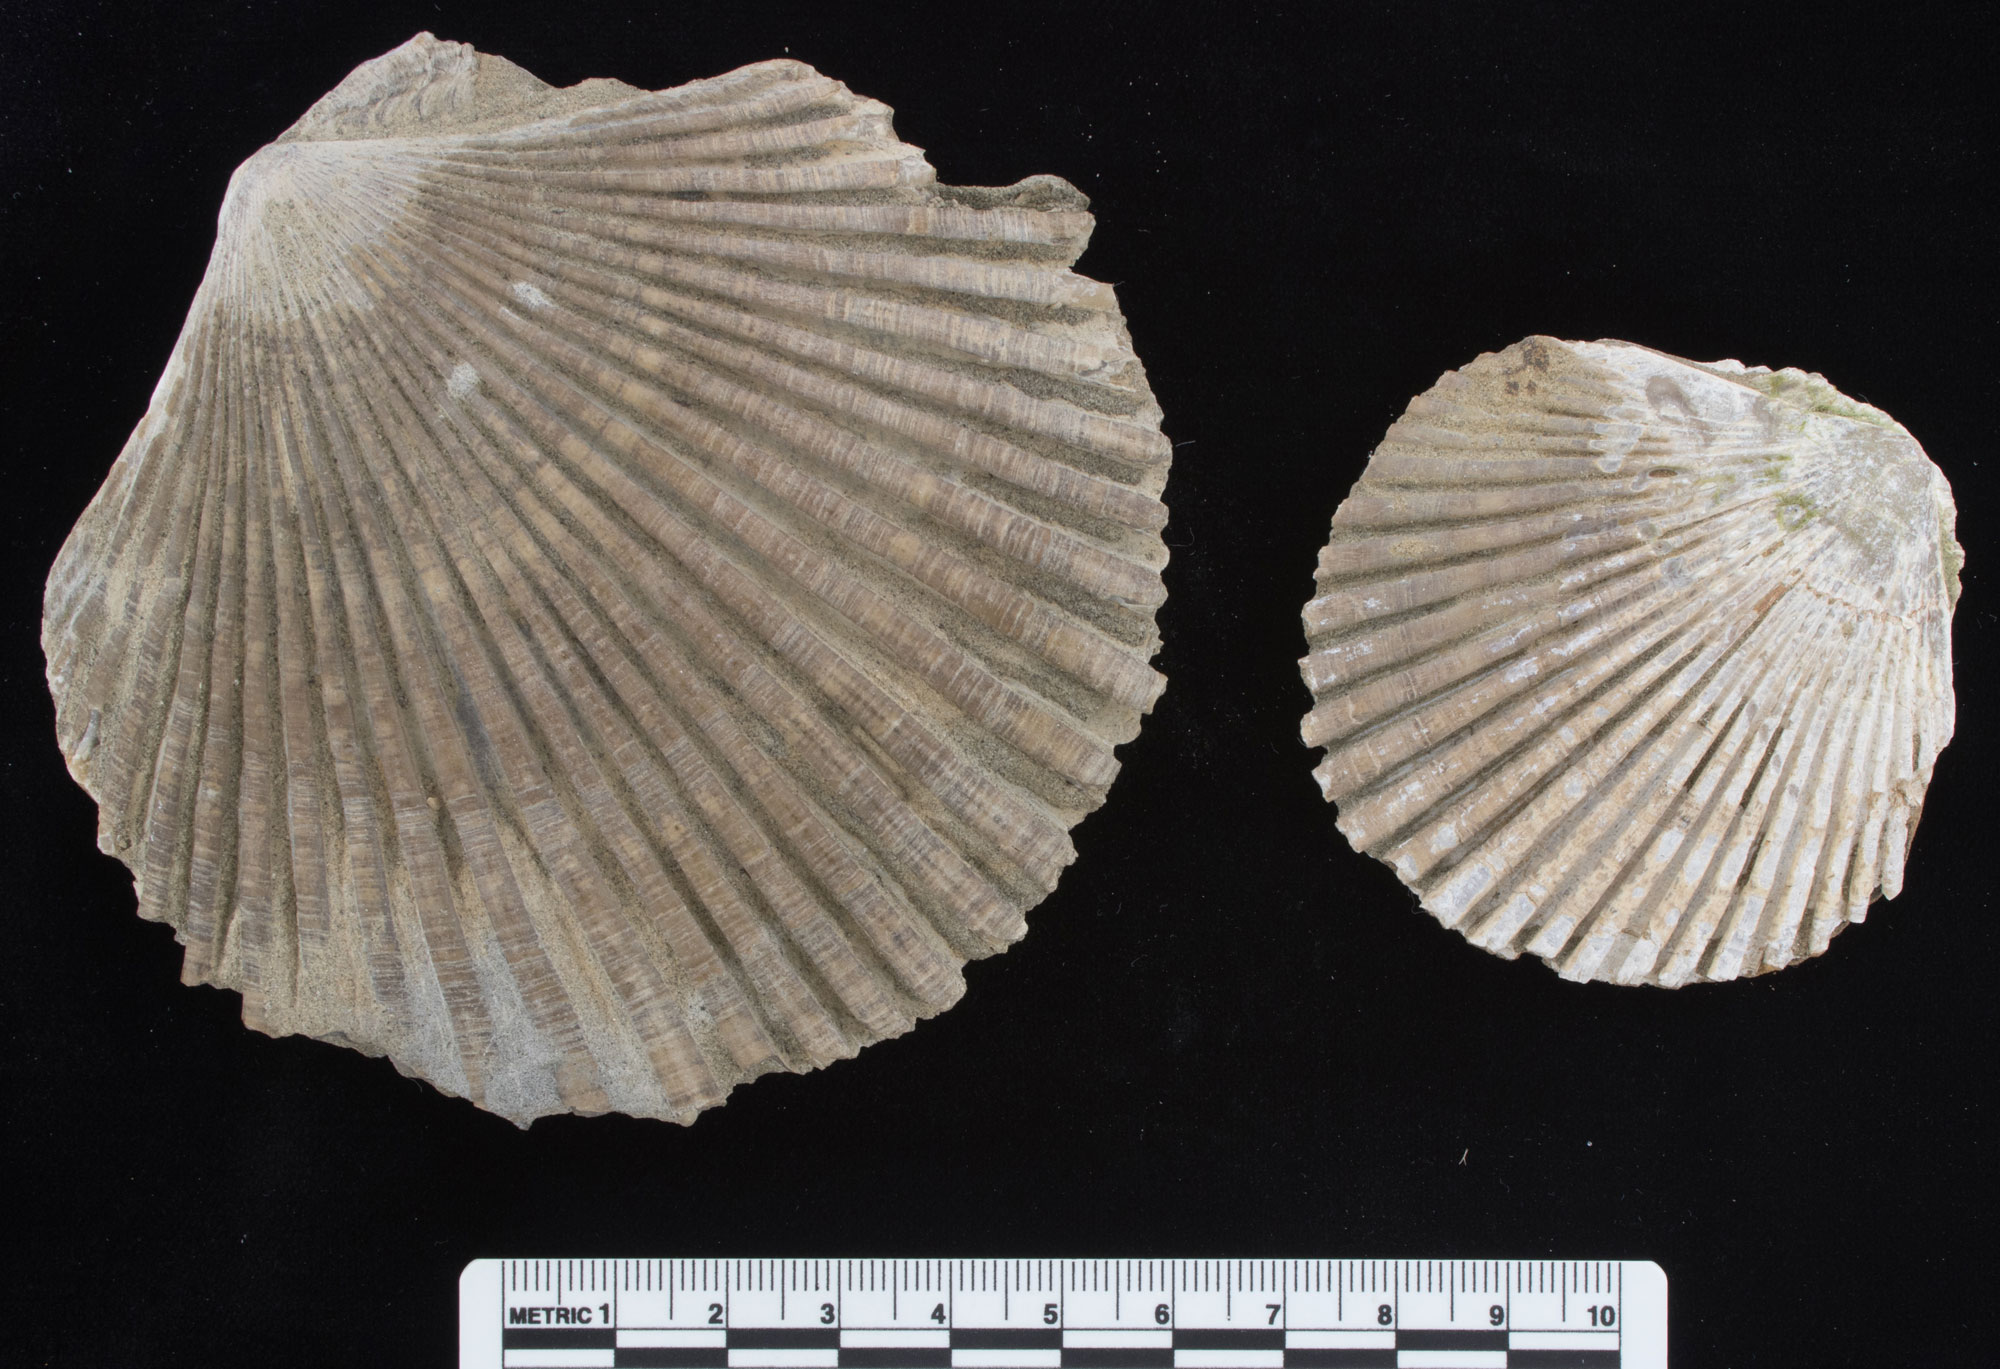 Photograph showing two scallop shell valves from the Miocene of California. The photo shows a large valve on the left and a smaller valve on the right. Each valve has a series of ridges that begin at the hinge and radiate fan-like to the edge of the valve. 